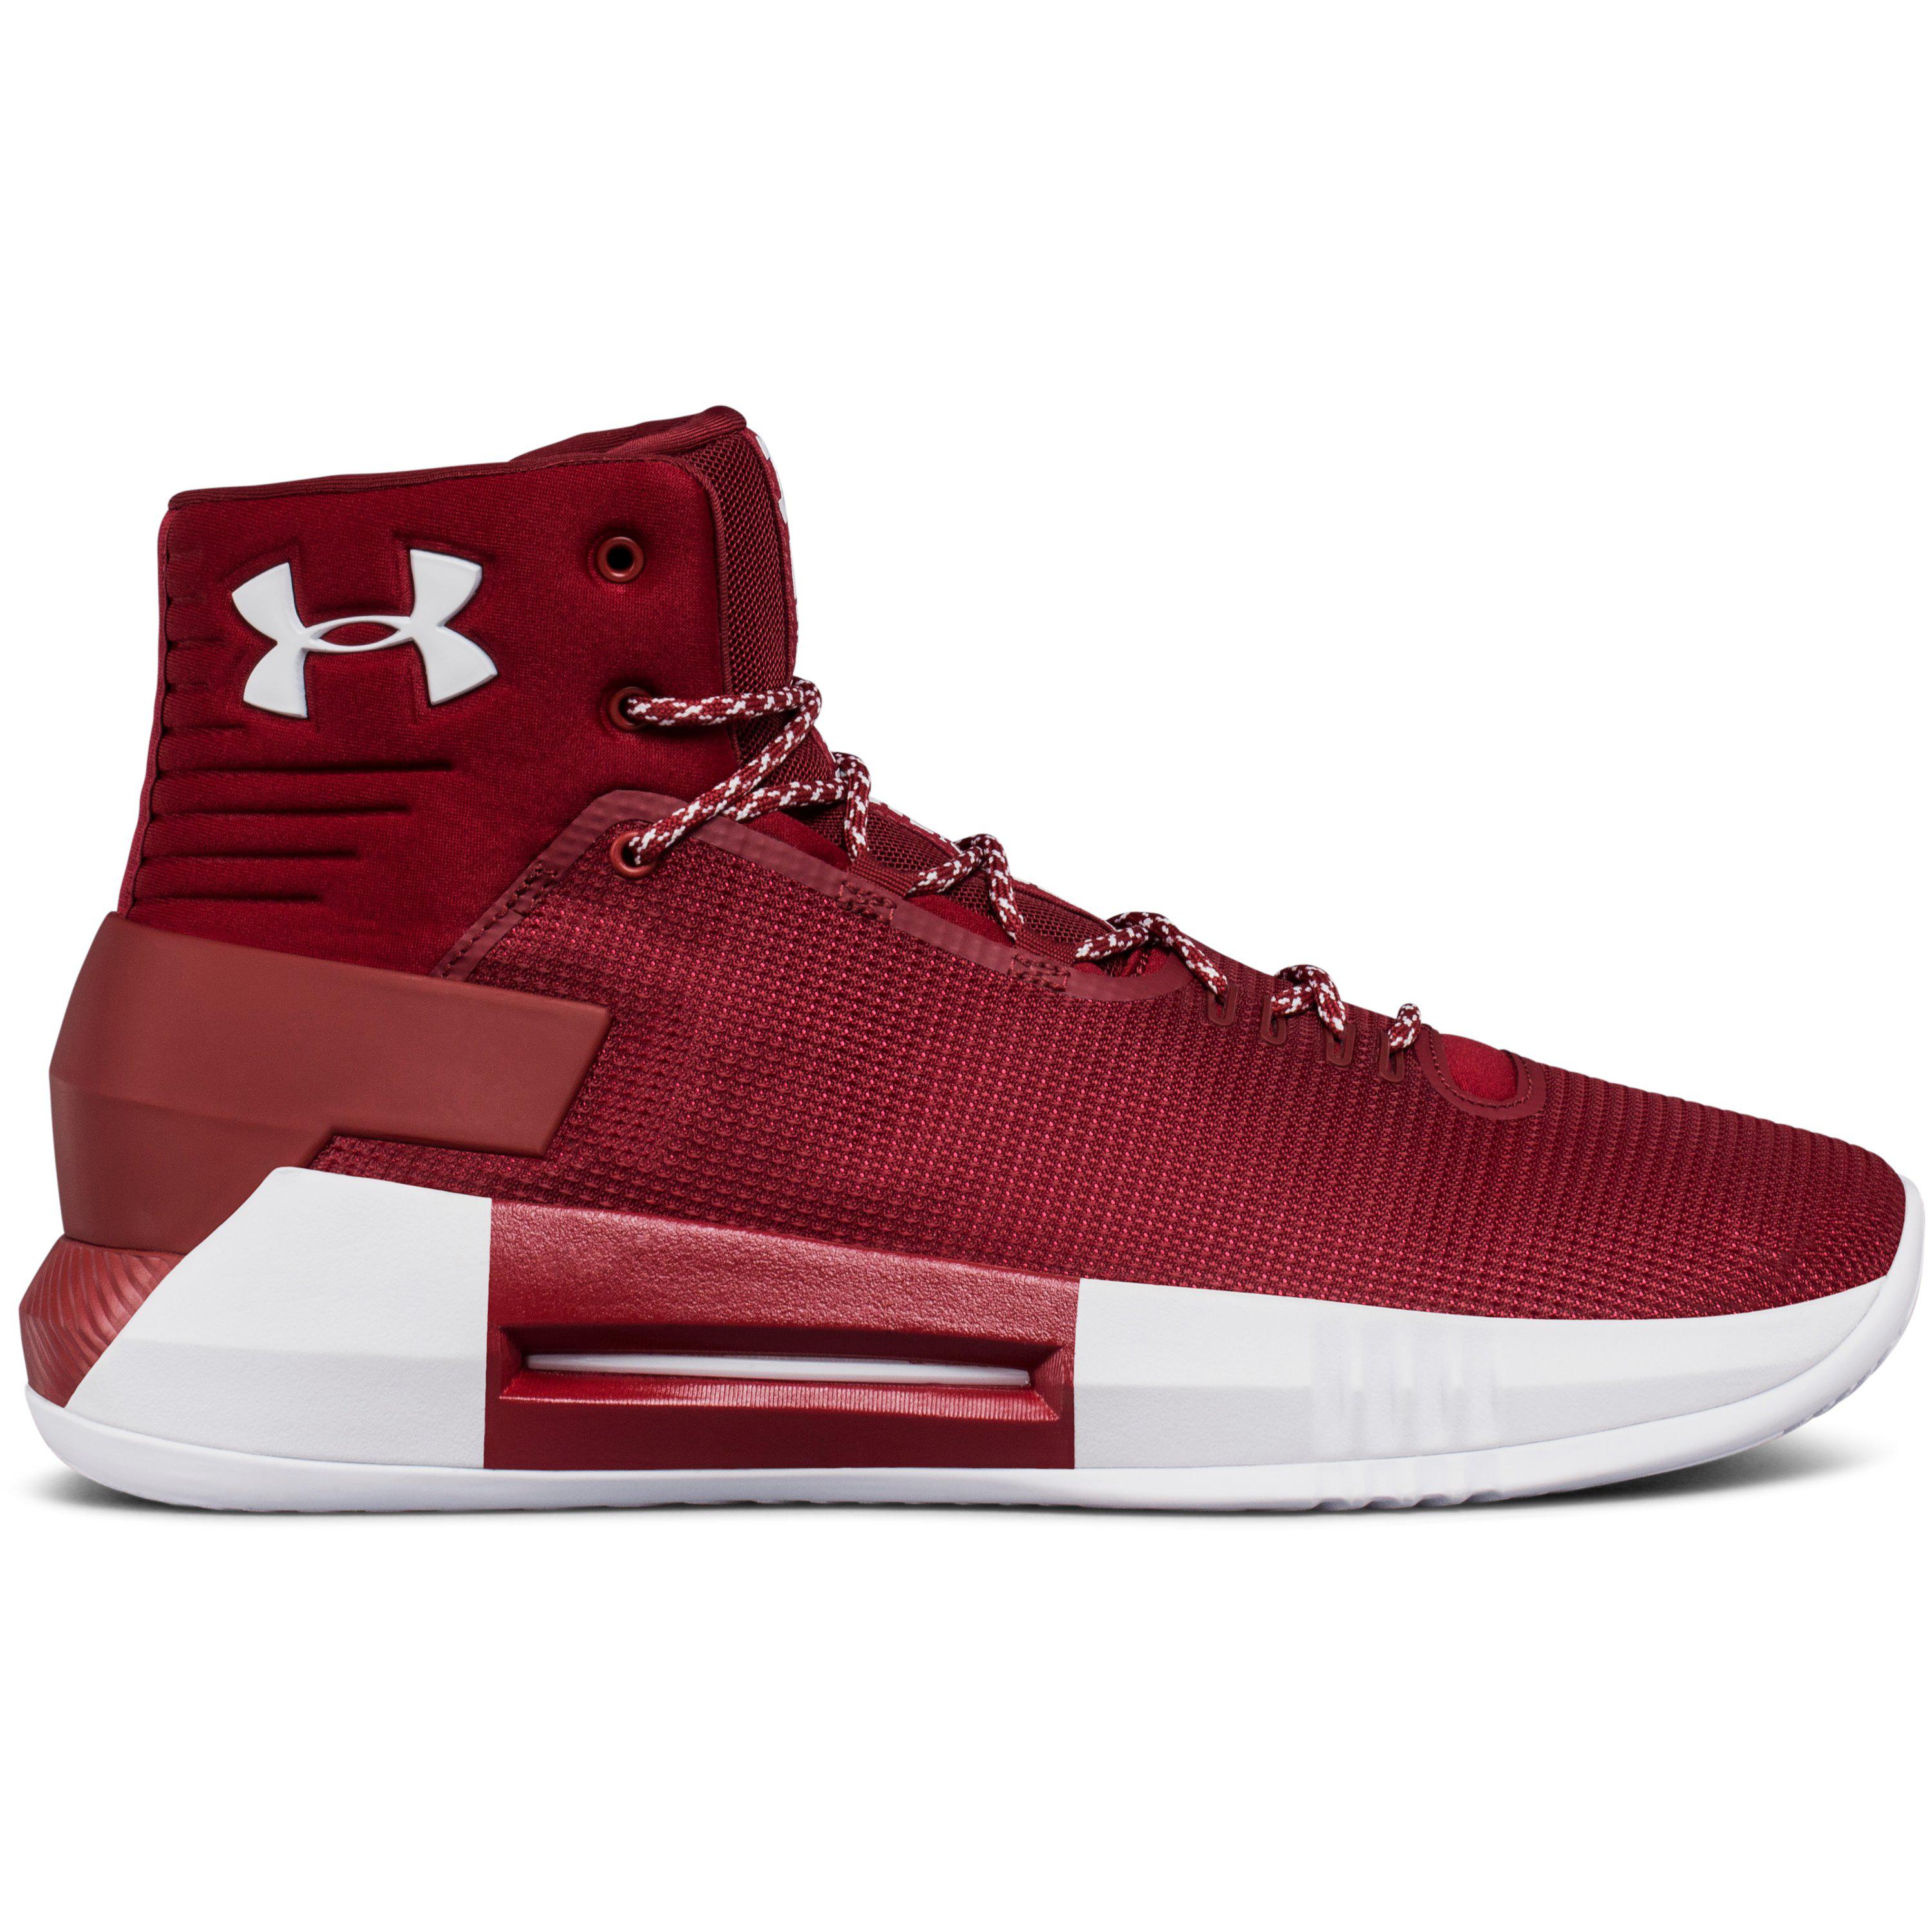 Lyst - Under Armour Men's Ua Team Drive 4 Basketball Shoes in Red for Men